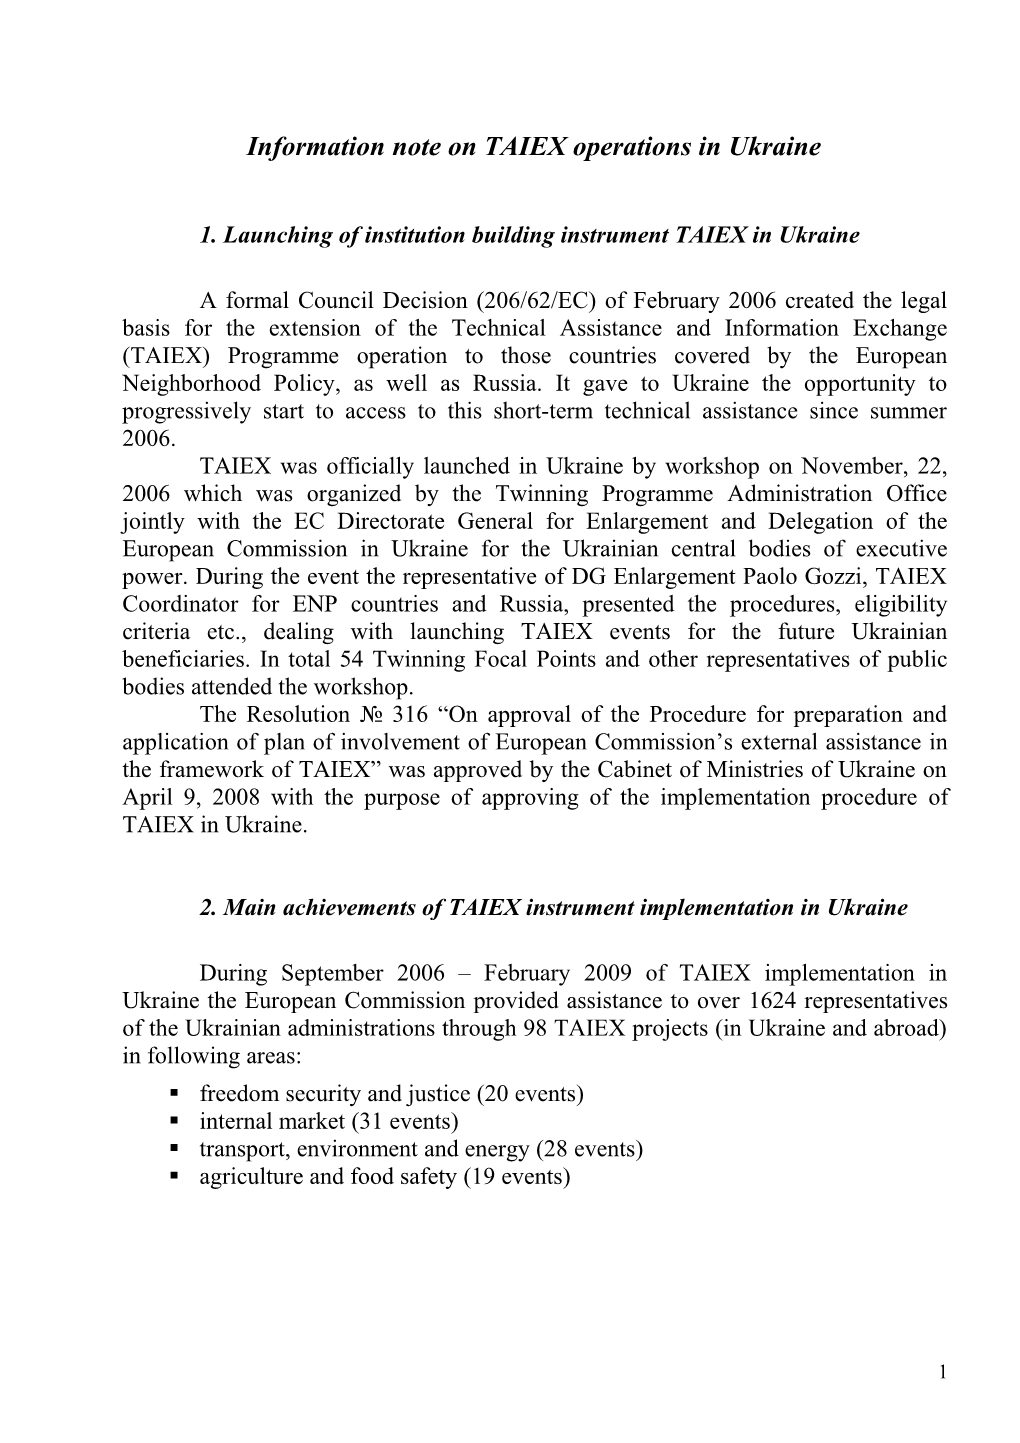 Informational Note on TAIEX Operations in Ukraine